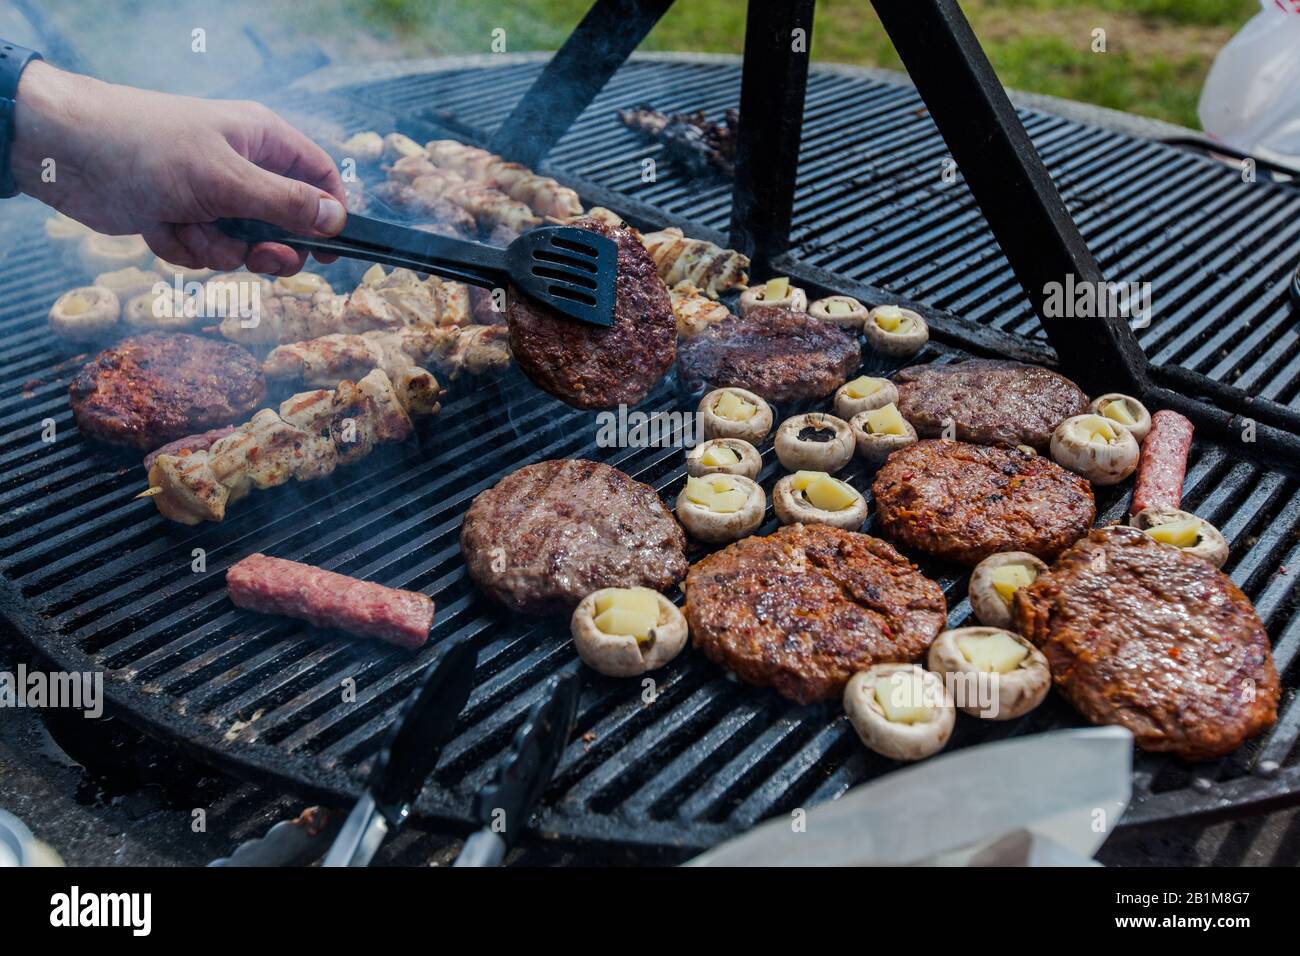 Preparing grilled meat on barbecue at picnic. Outdoor BBQ party Stock Photo  - Alamy